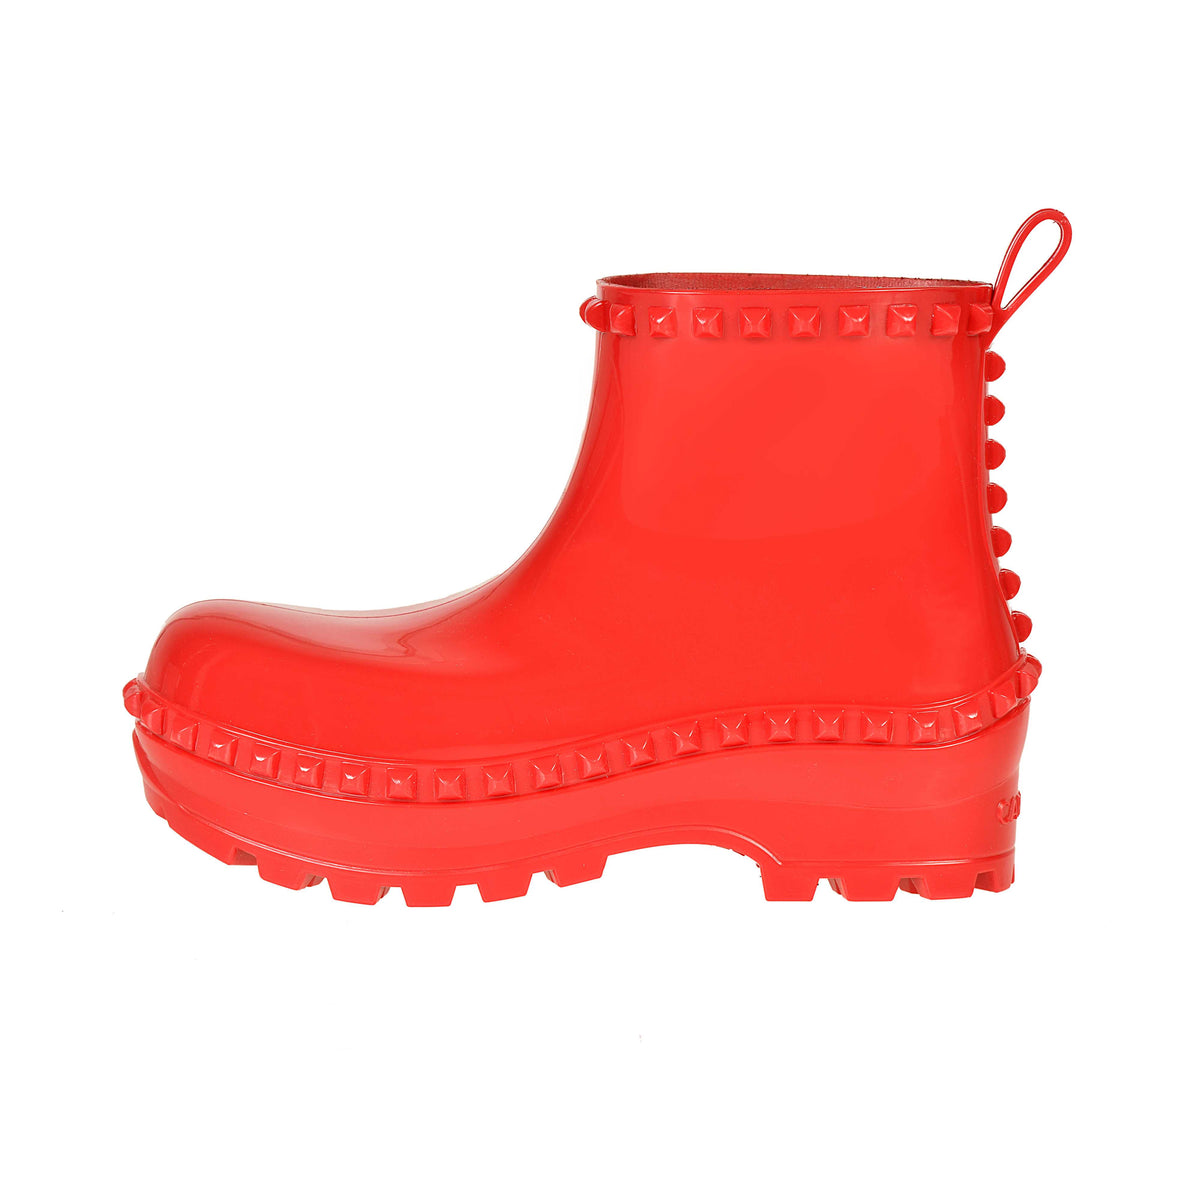 Red ankle jelly puddle boots for women 